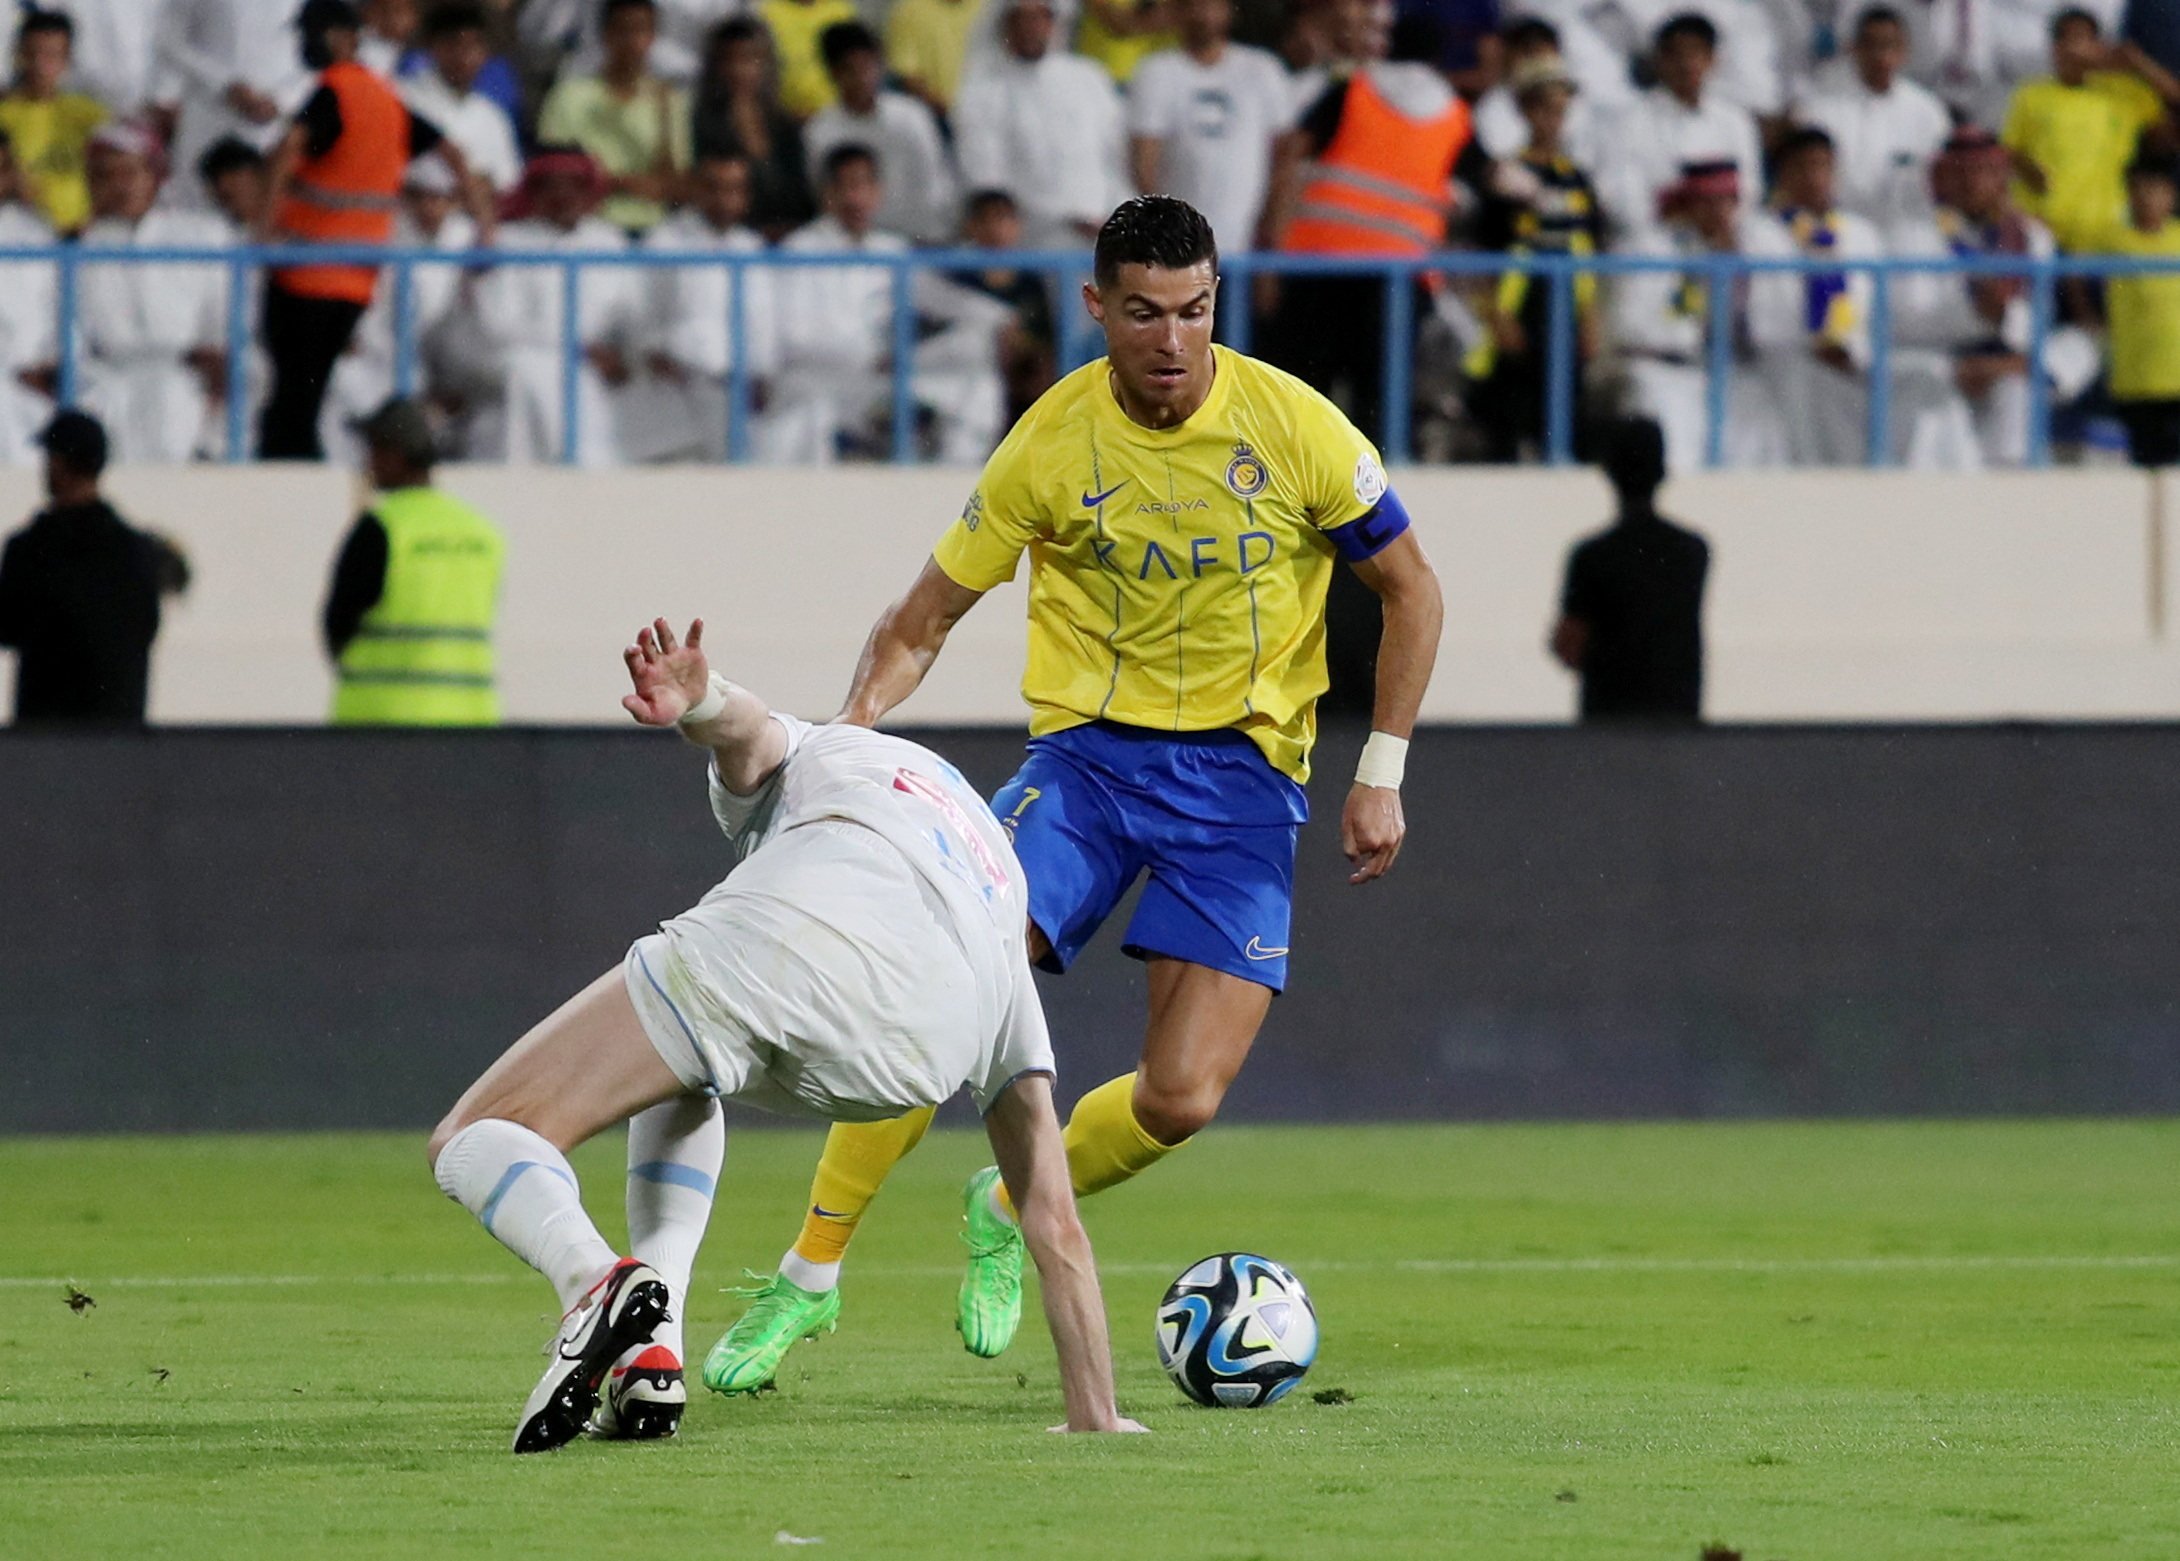 The presence of big names such as Al Nassr’s Cristiano Ronaldo (above), Karim Benzema and Neymar has not translated into international success for the Saudi Pro League. Photo: Reuters